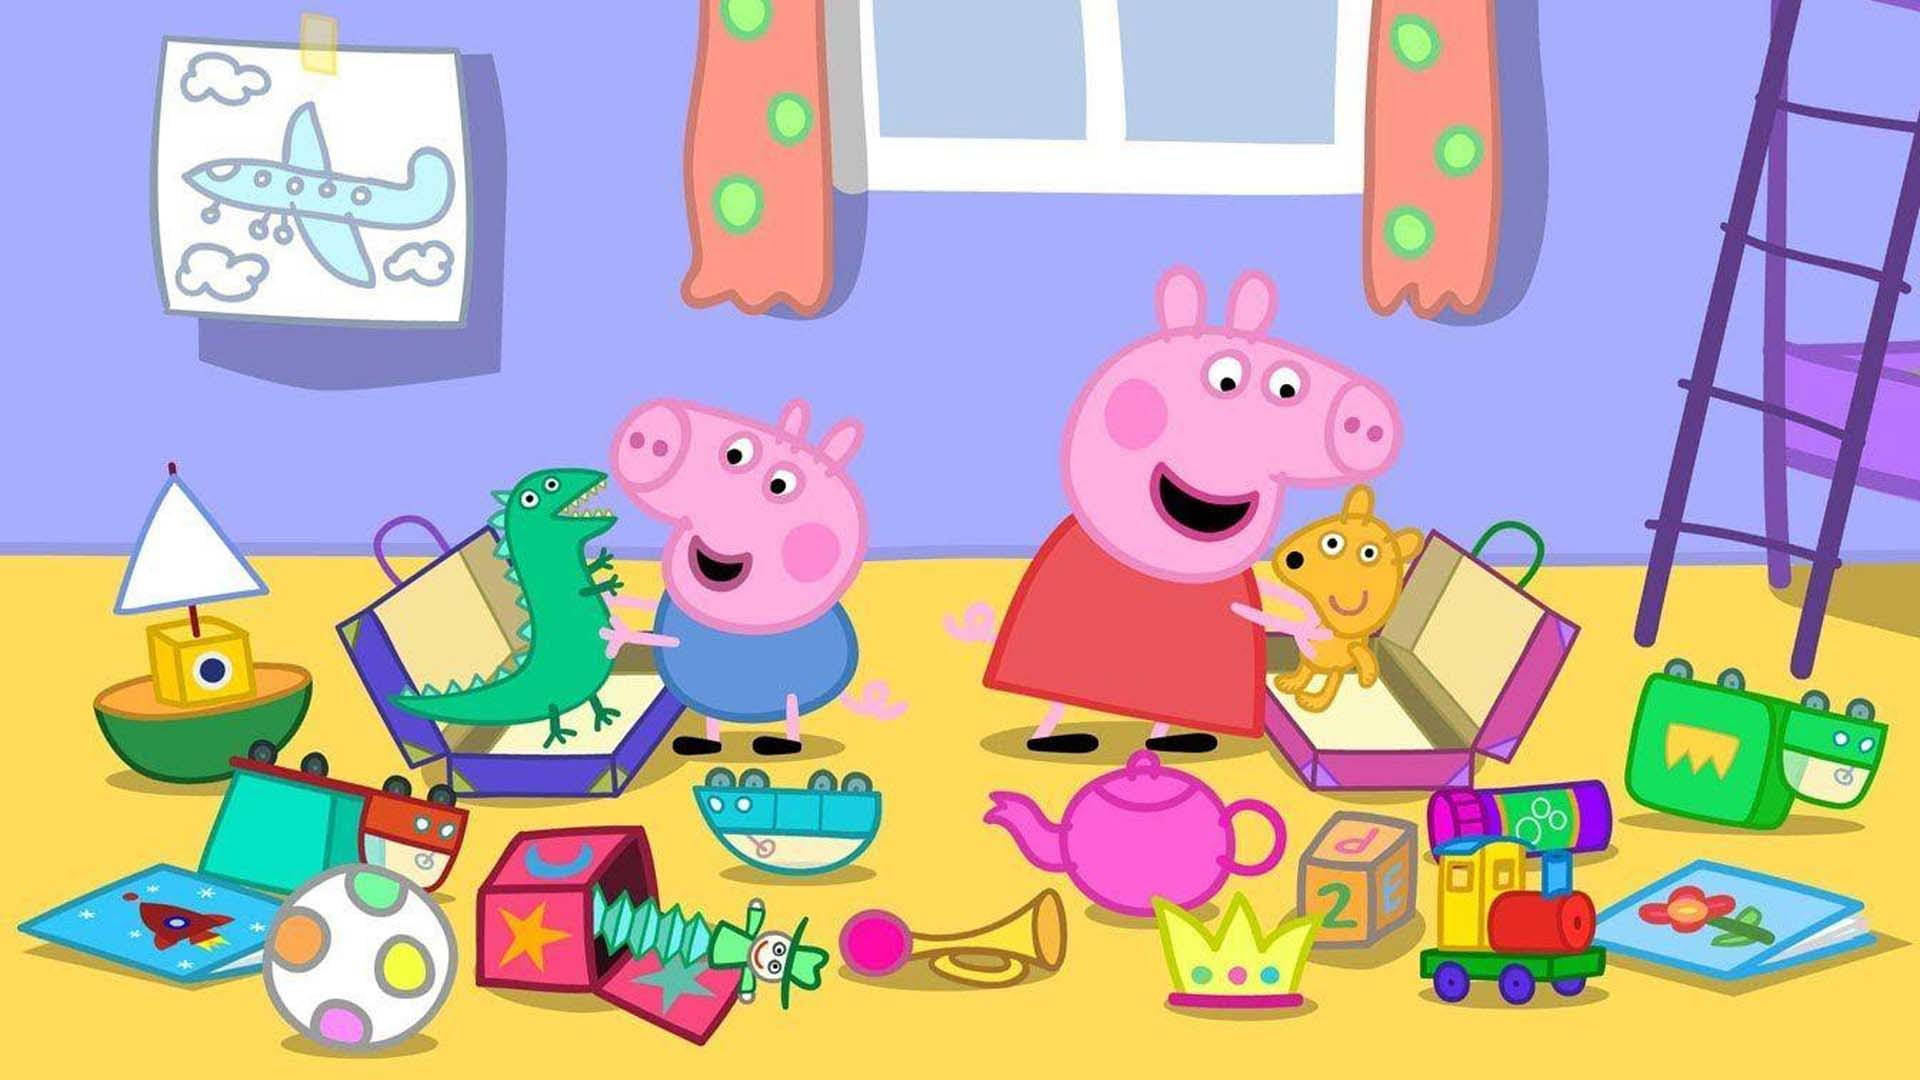 Exciting gaming experience with Peppa Pig on iPad Wallpaper